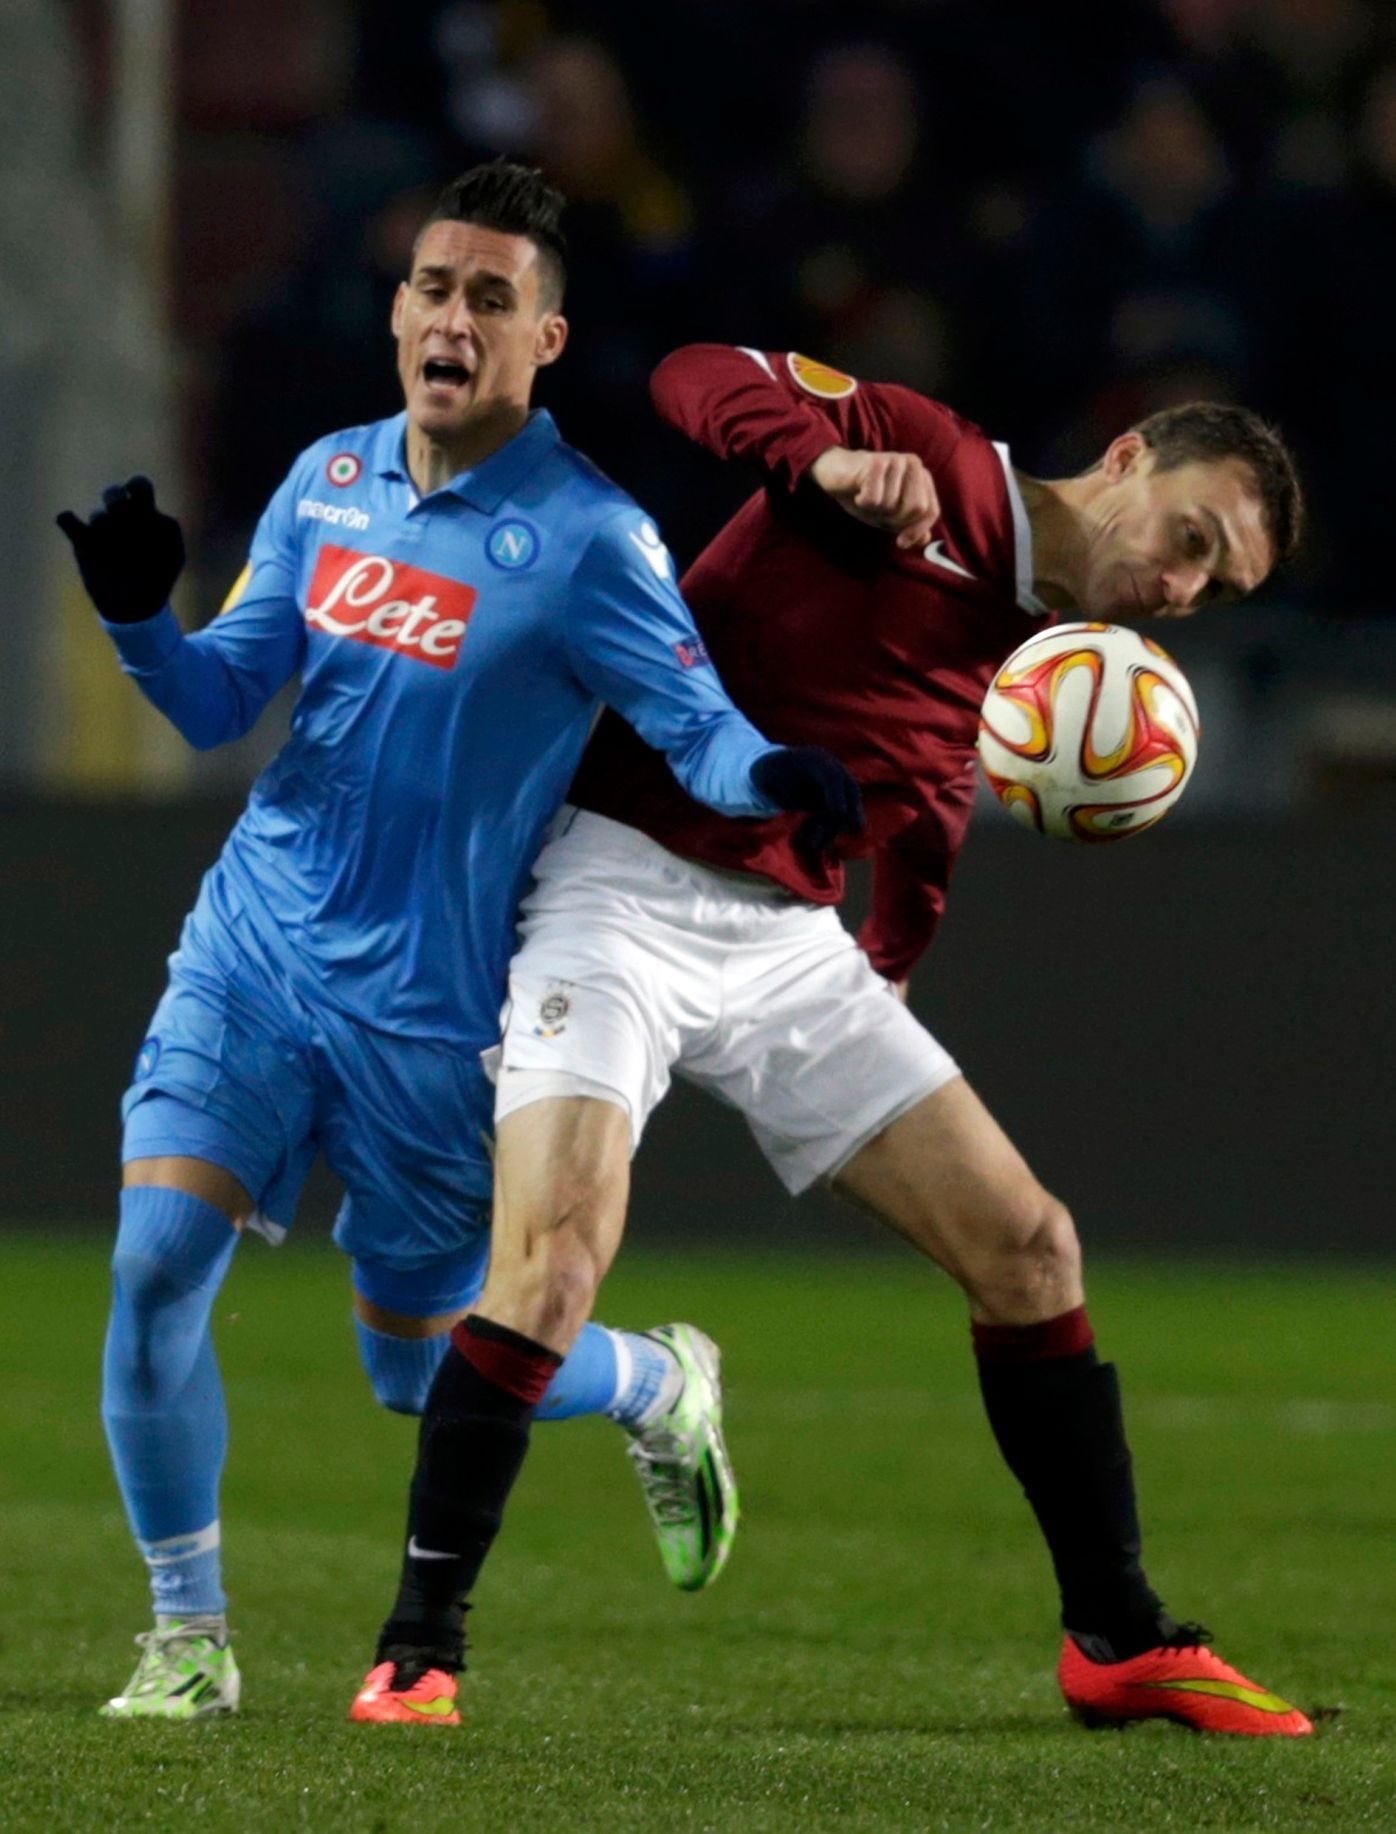 Sparta Praha's Lafata fights for the ball with Napoli's Callejon during their Europa League soccer match at Stadion Letna in Prague